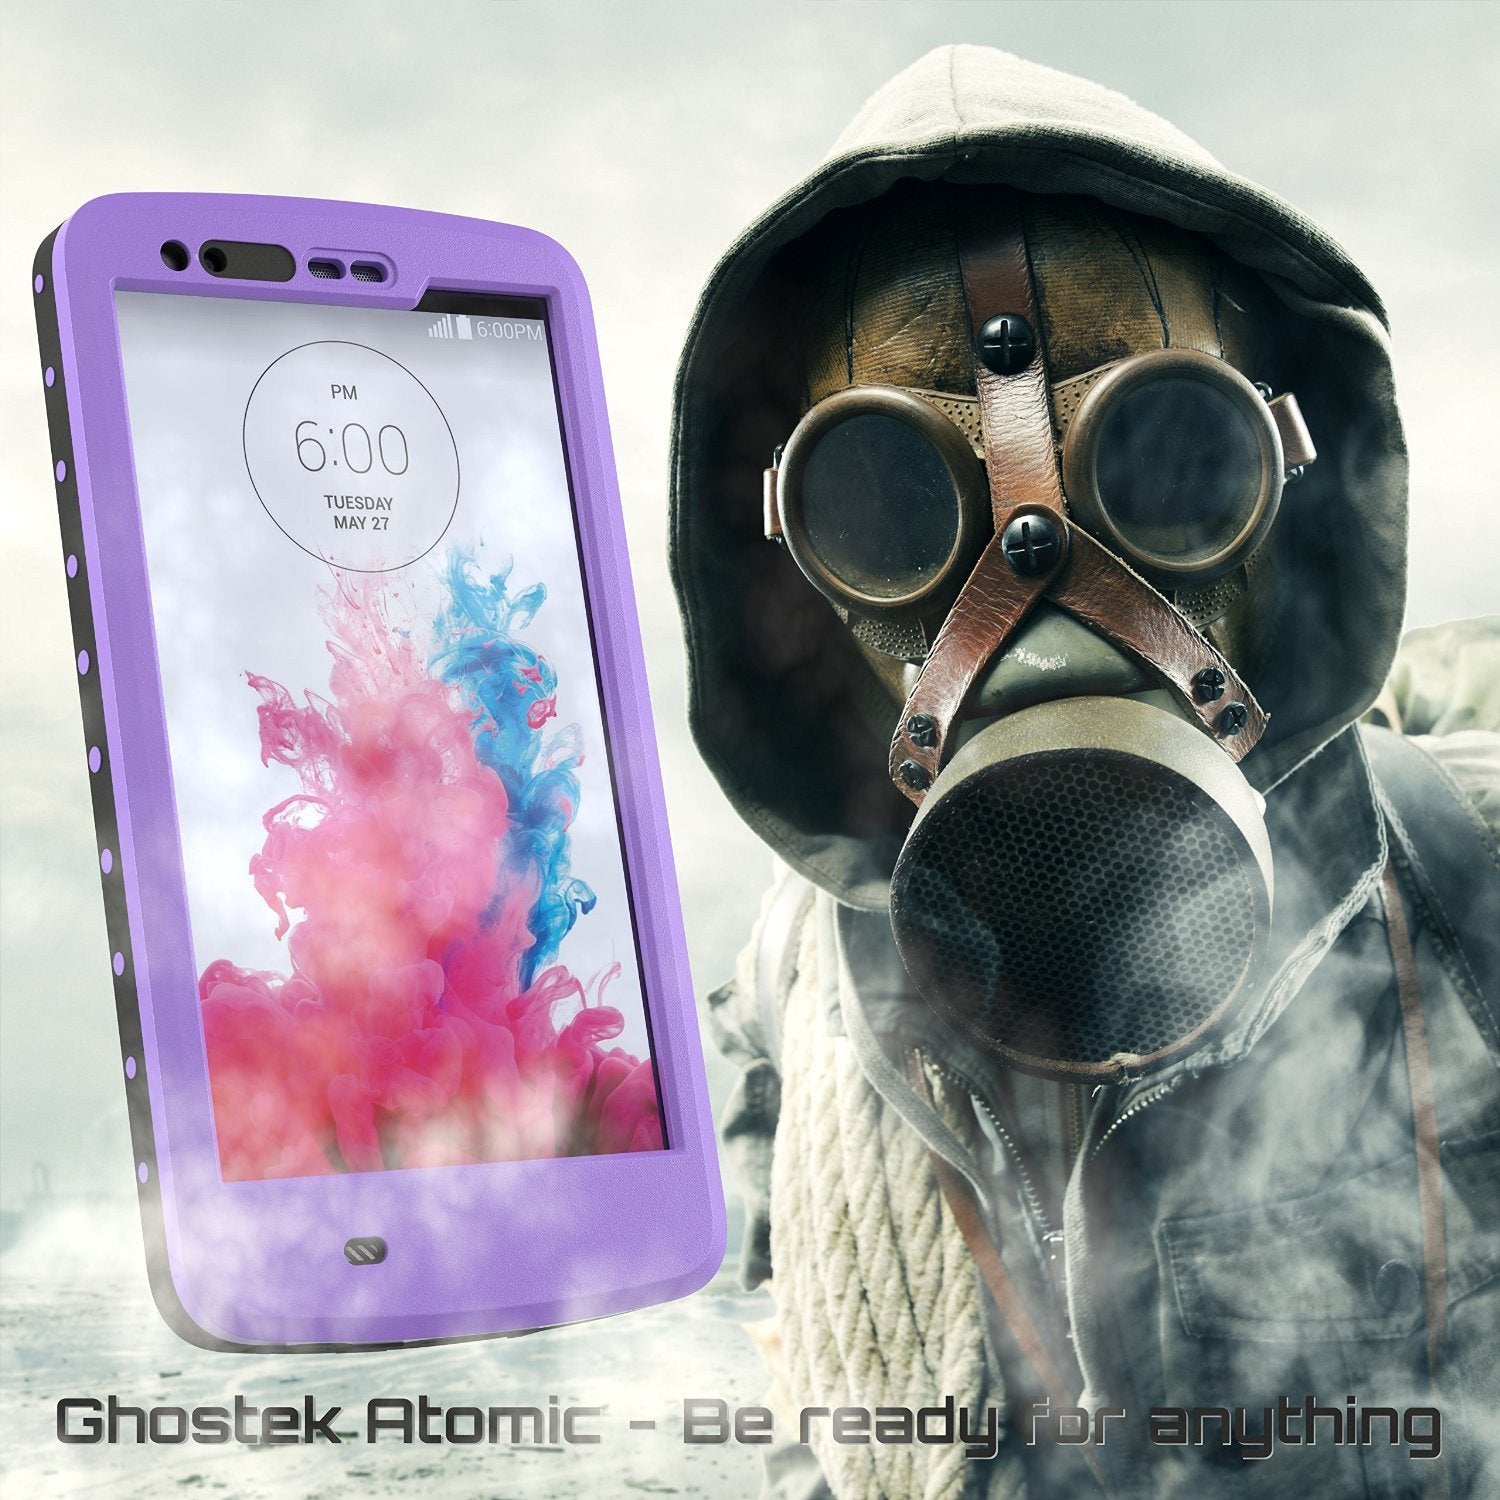 LG G3 Waterproof Case, Ghostek Atomic PURPLE W/ Attached Screen Protector  Slim Fitted  LG G3